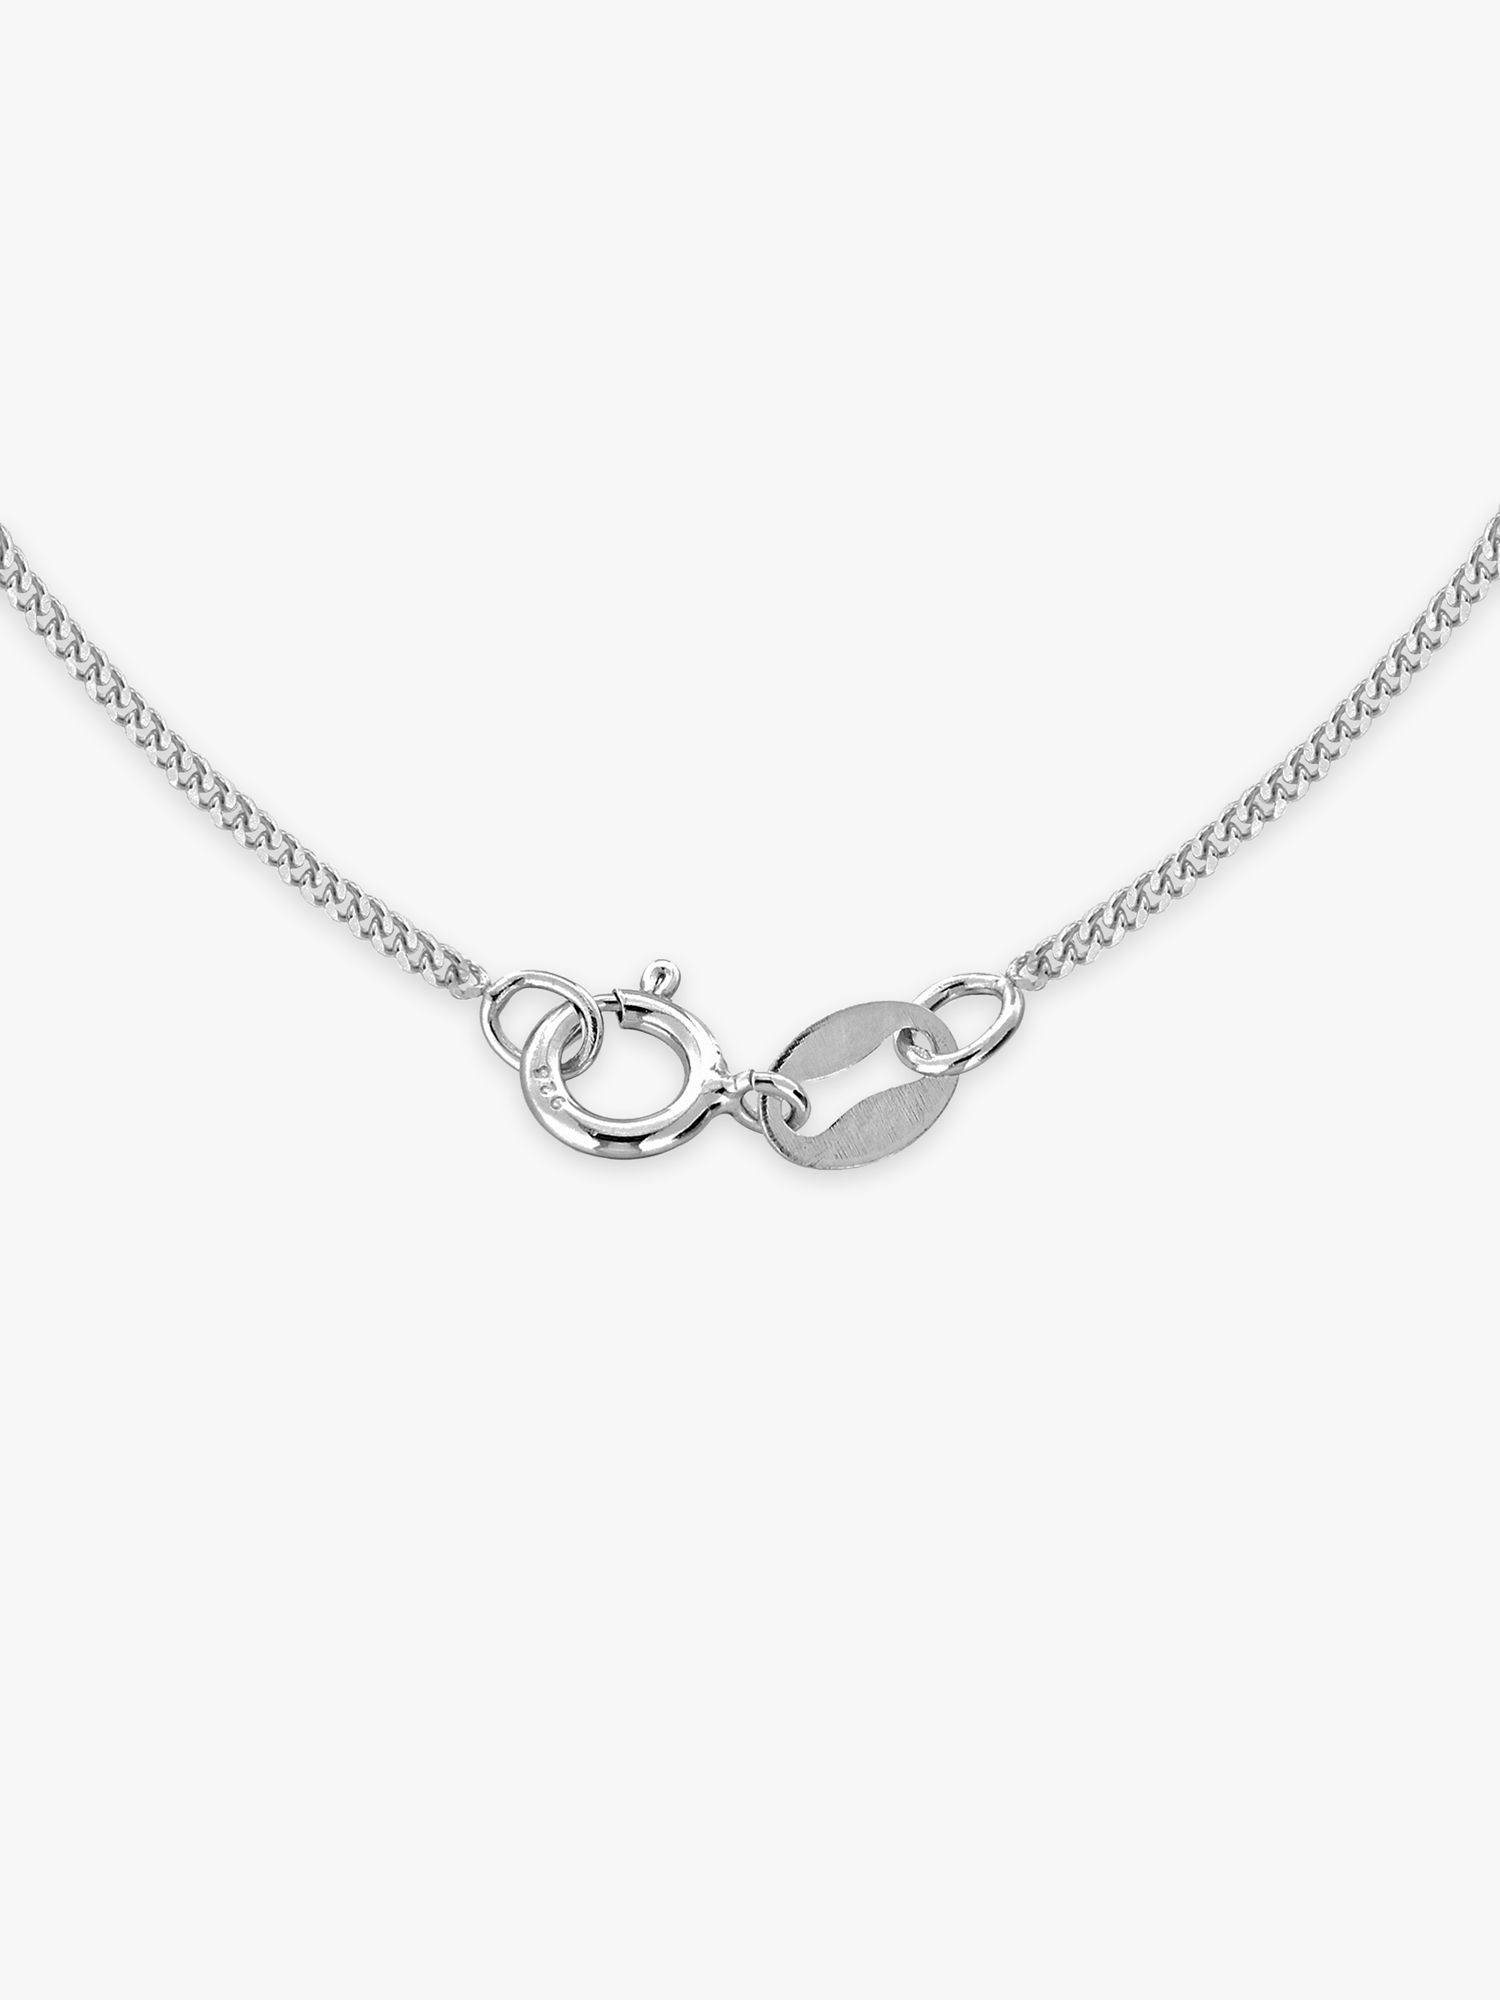 Buy IBB Sterling Silver Cubic Zirconia Swirl Earrings & Necklace Gift Set, Silver Online at johnlewis.com